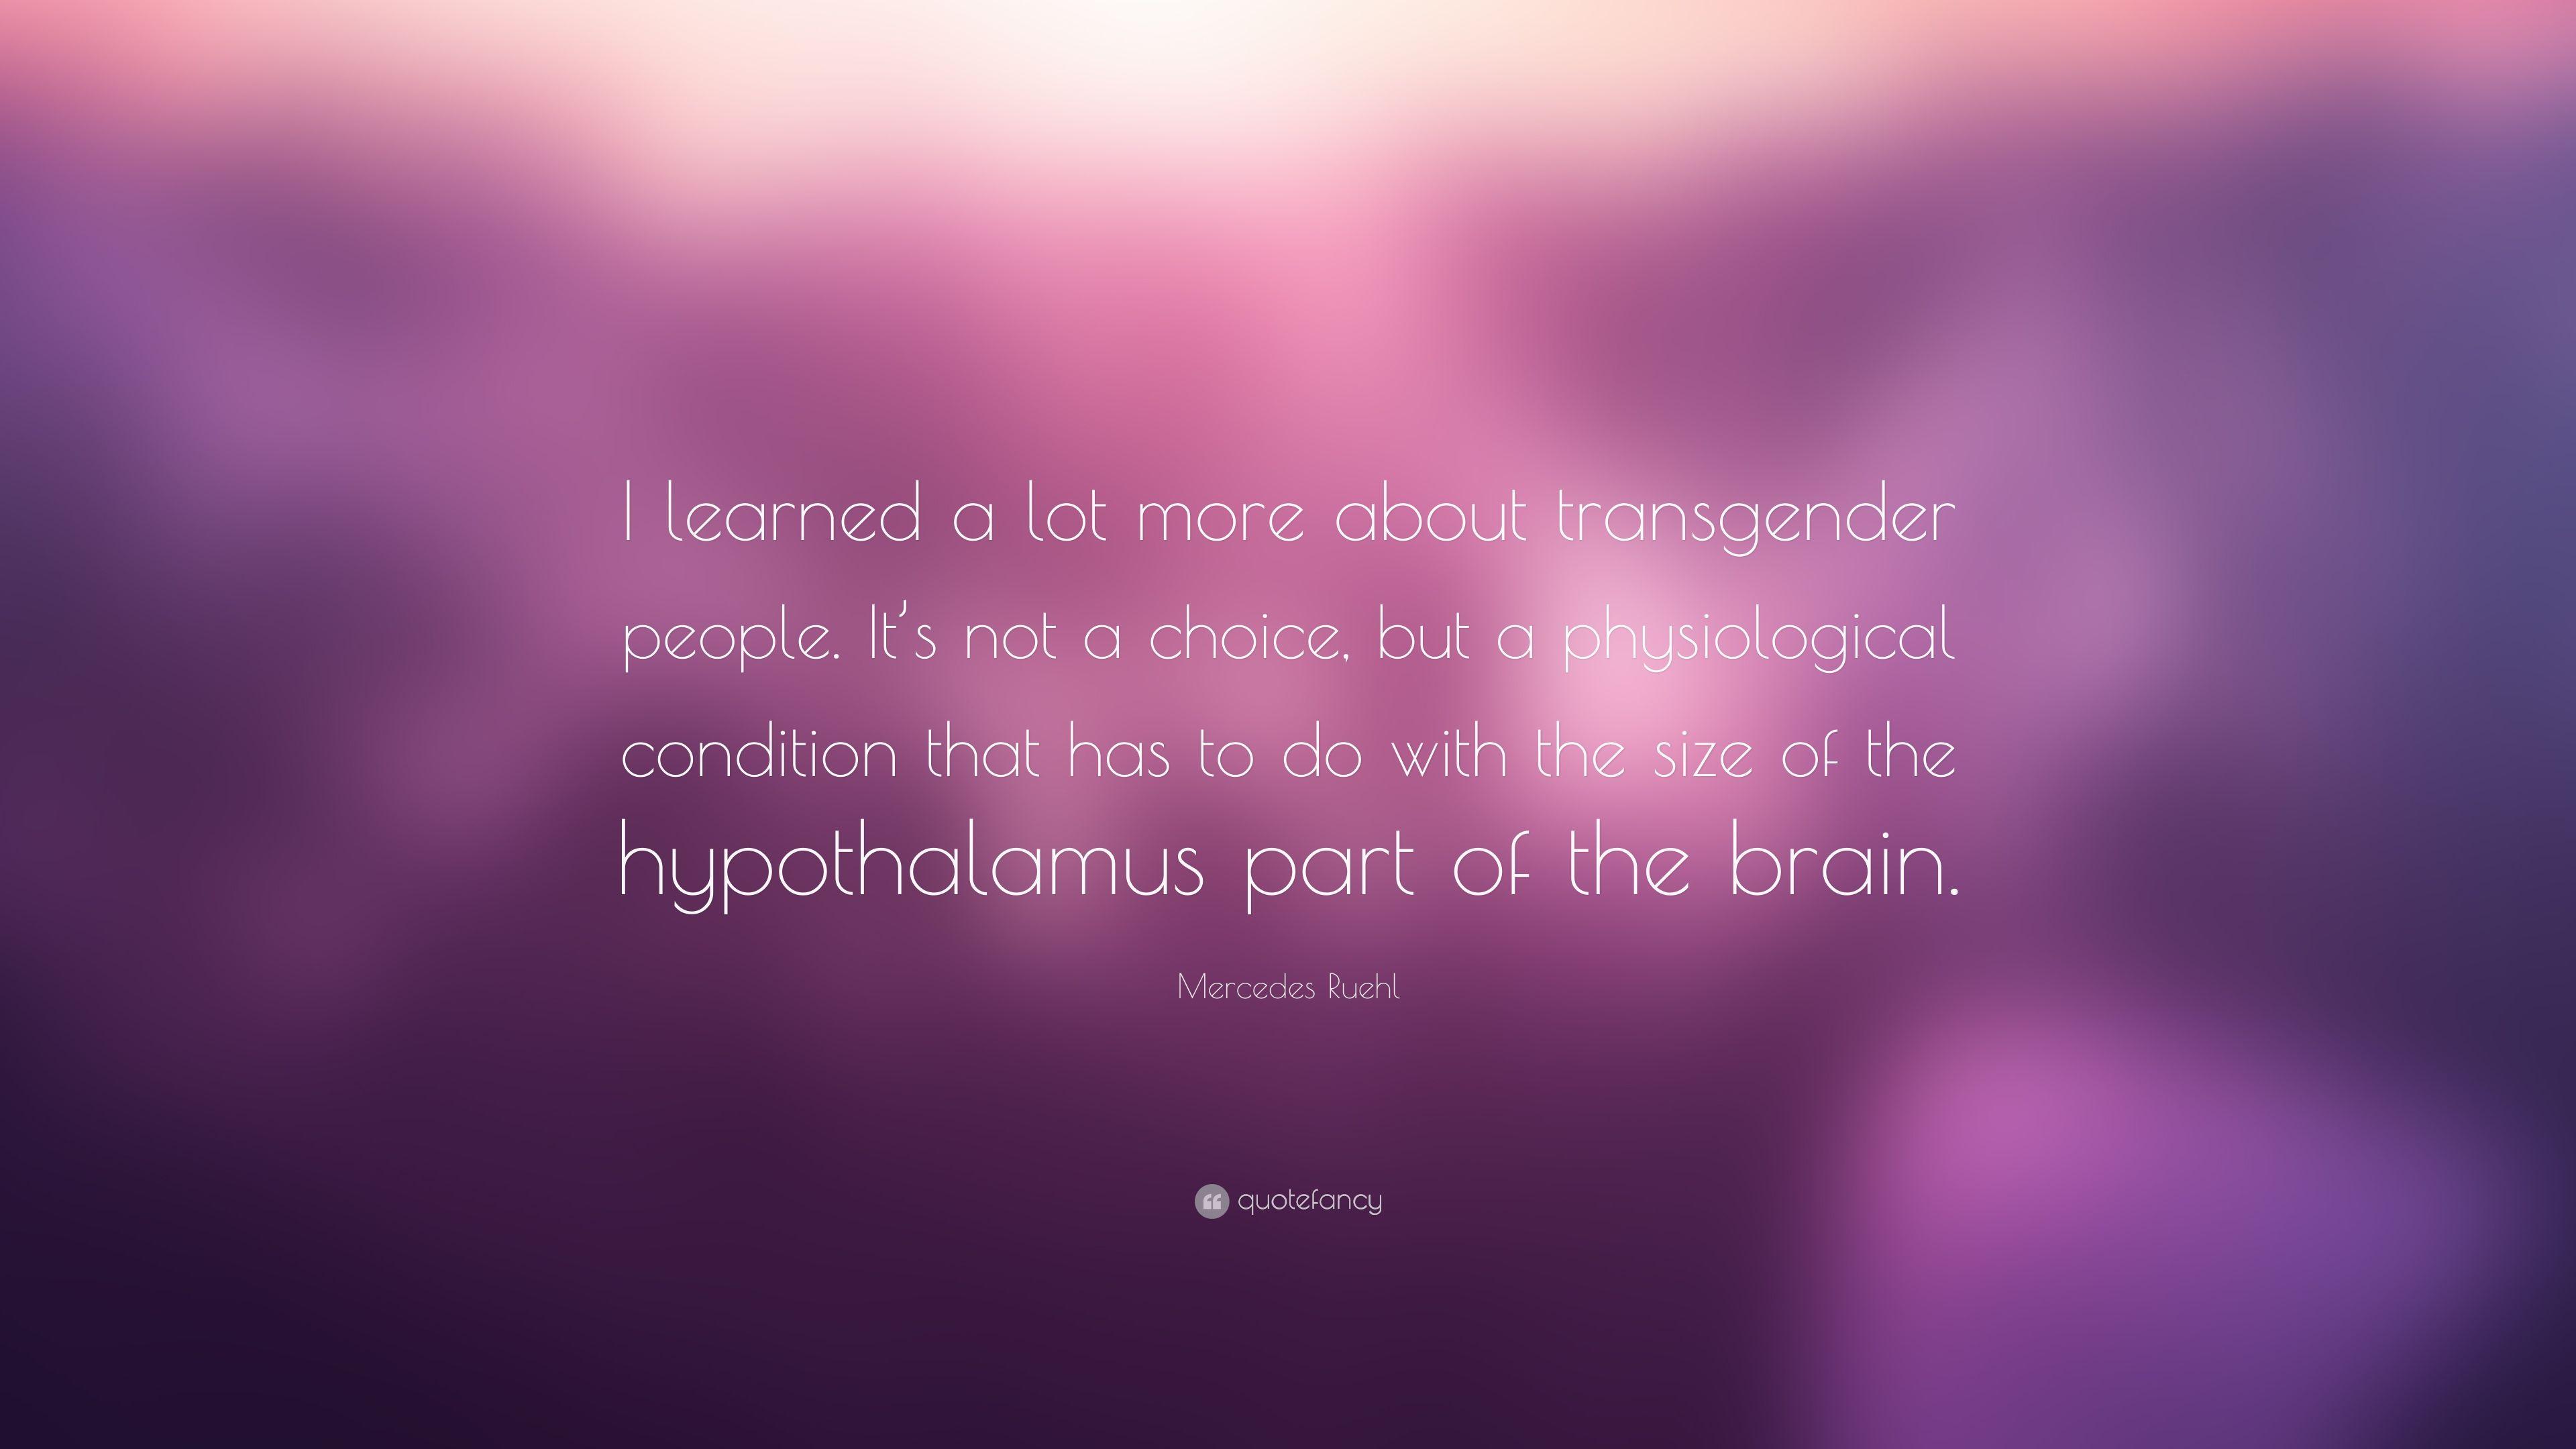 Mercedes Ruehl Quote: “I learned a lot more about transgender